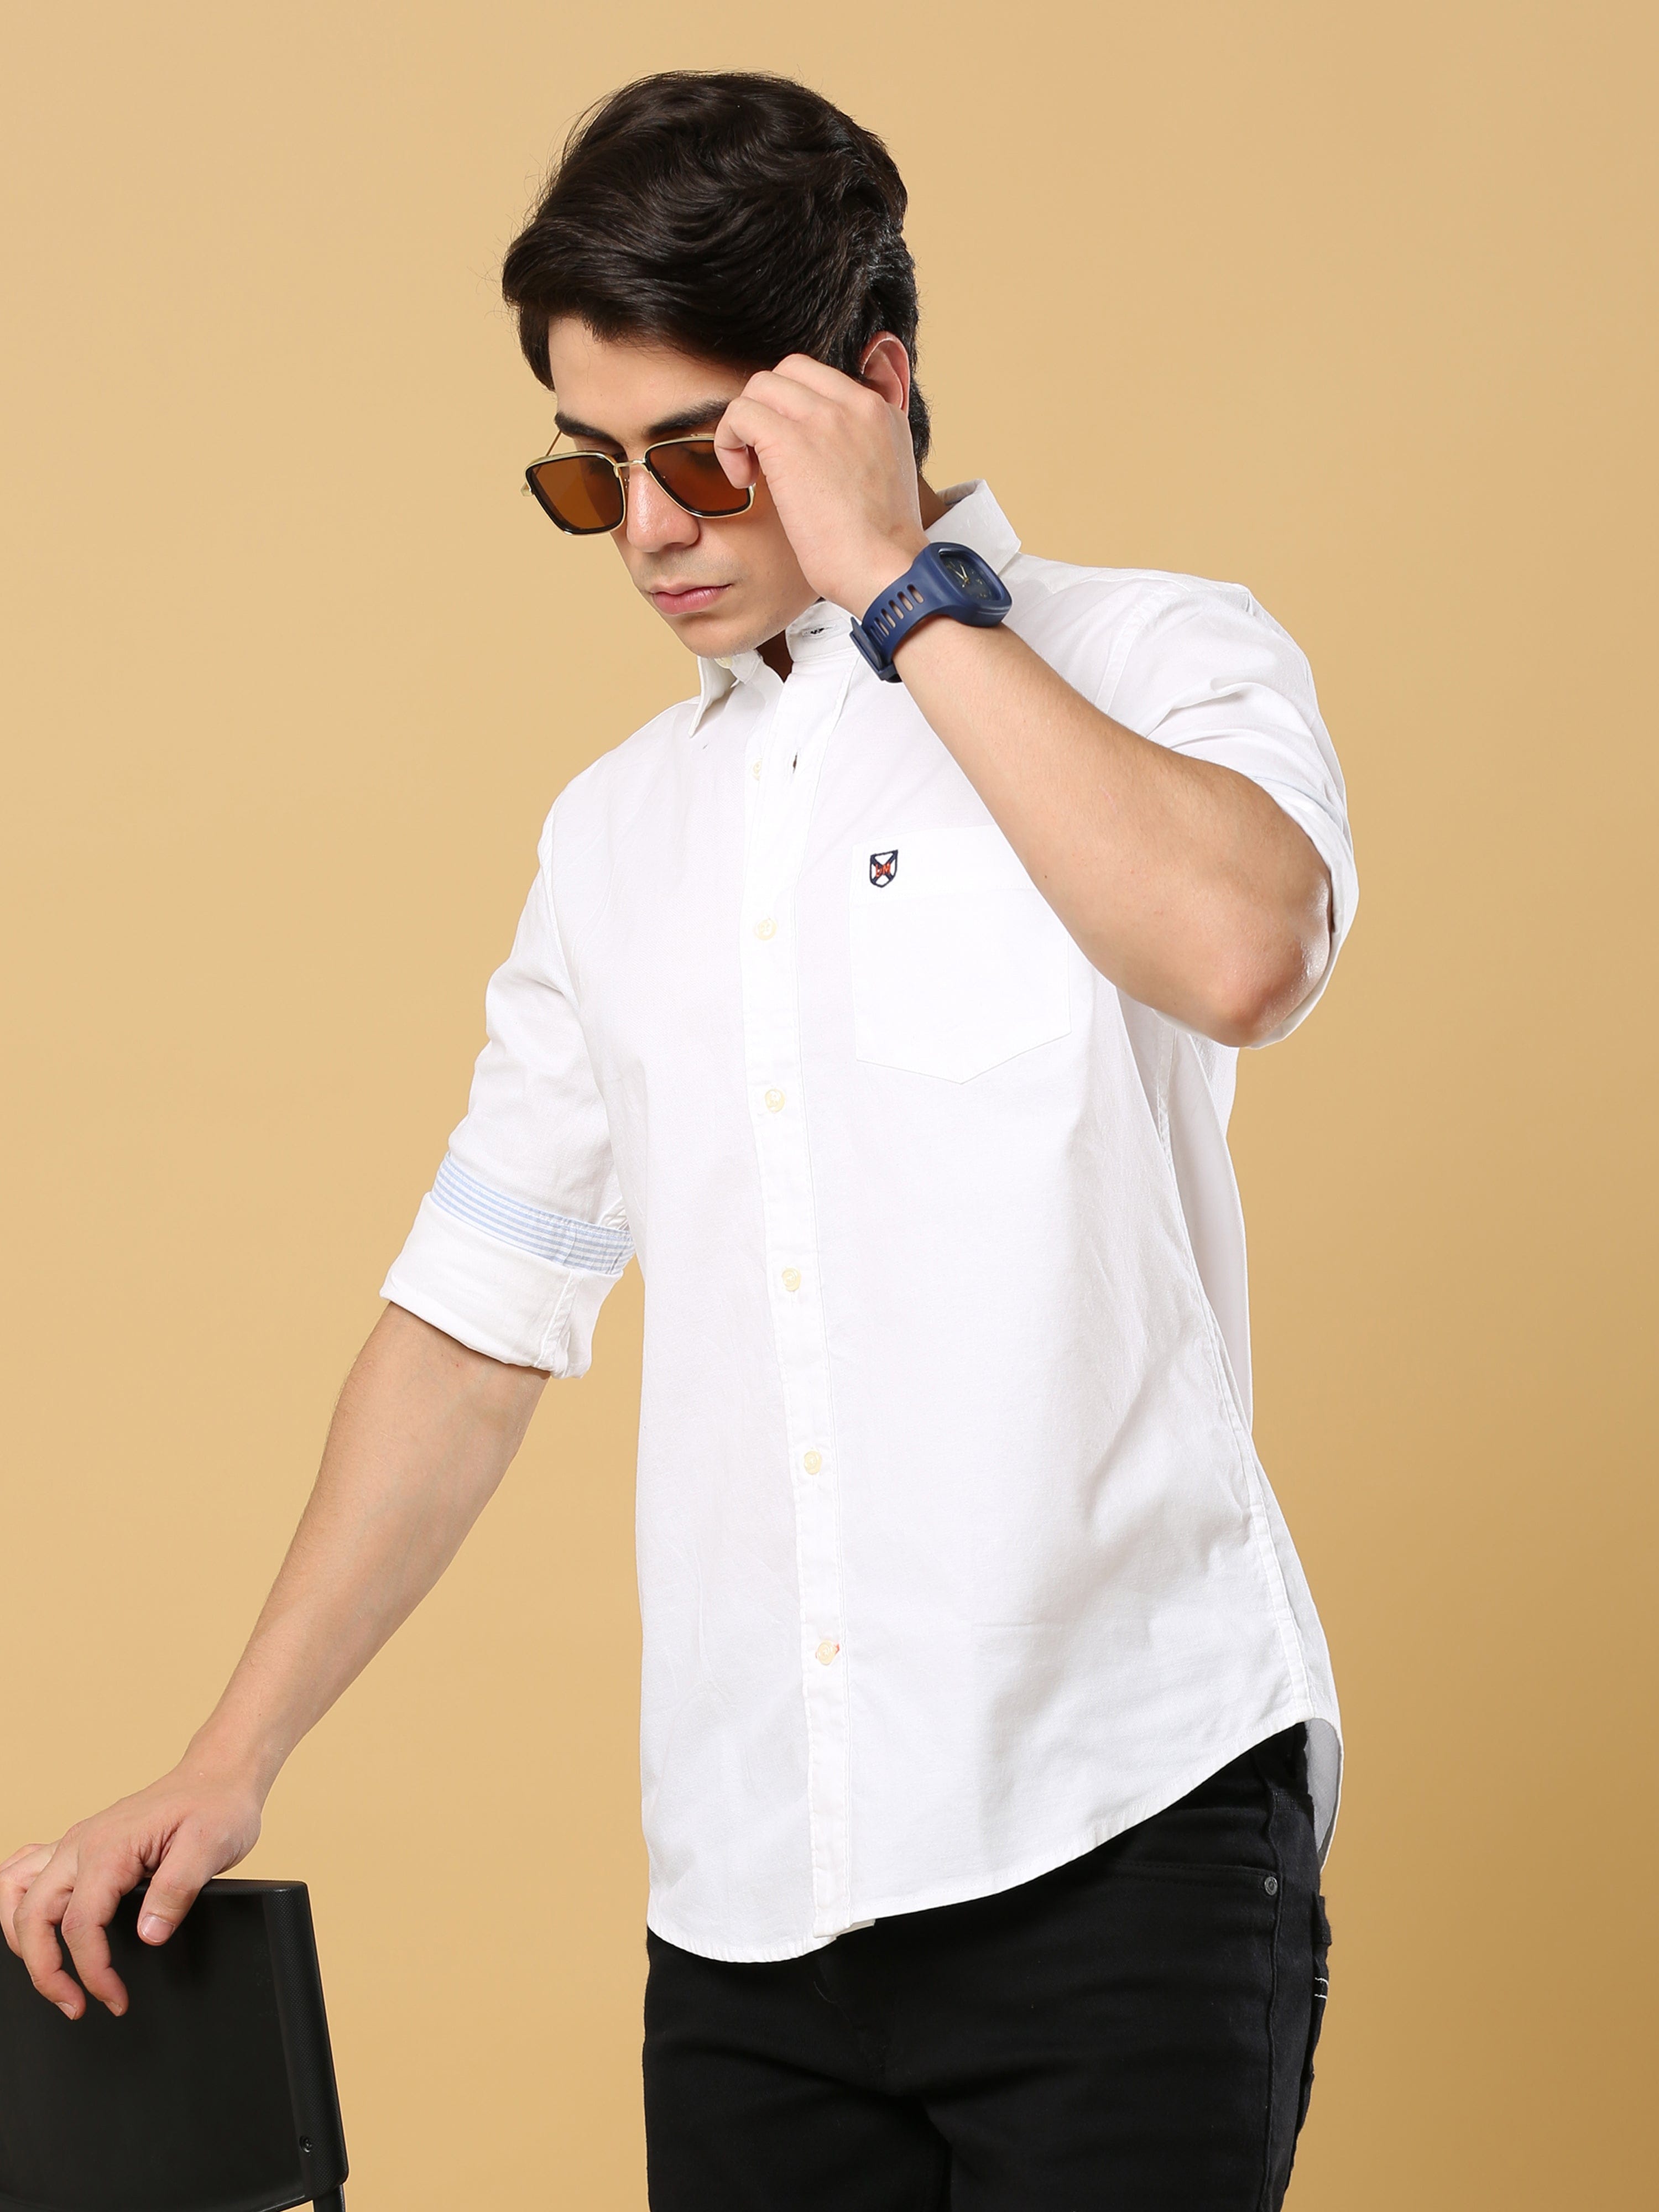 Shop Latest Premium White Oxford Shirt Online At Great PriceRs. 699.00